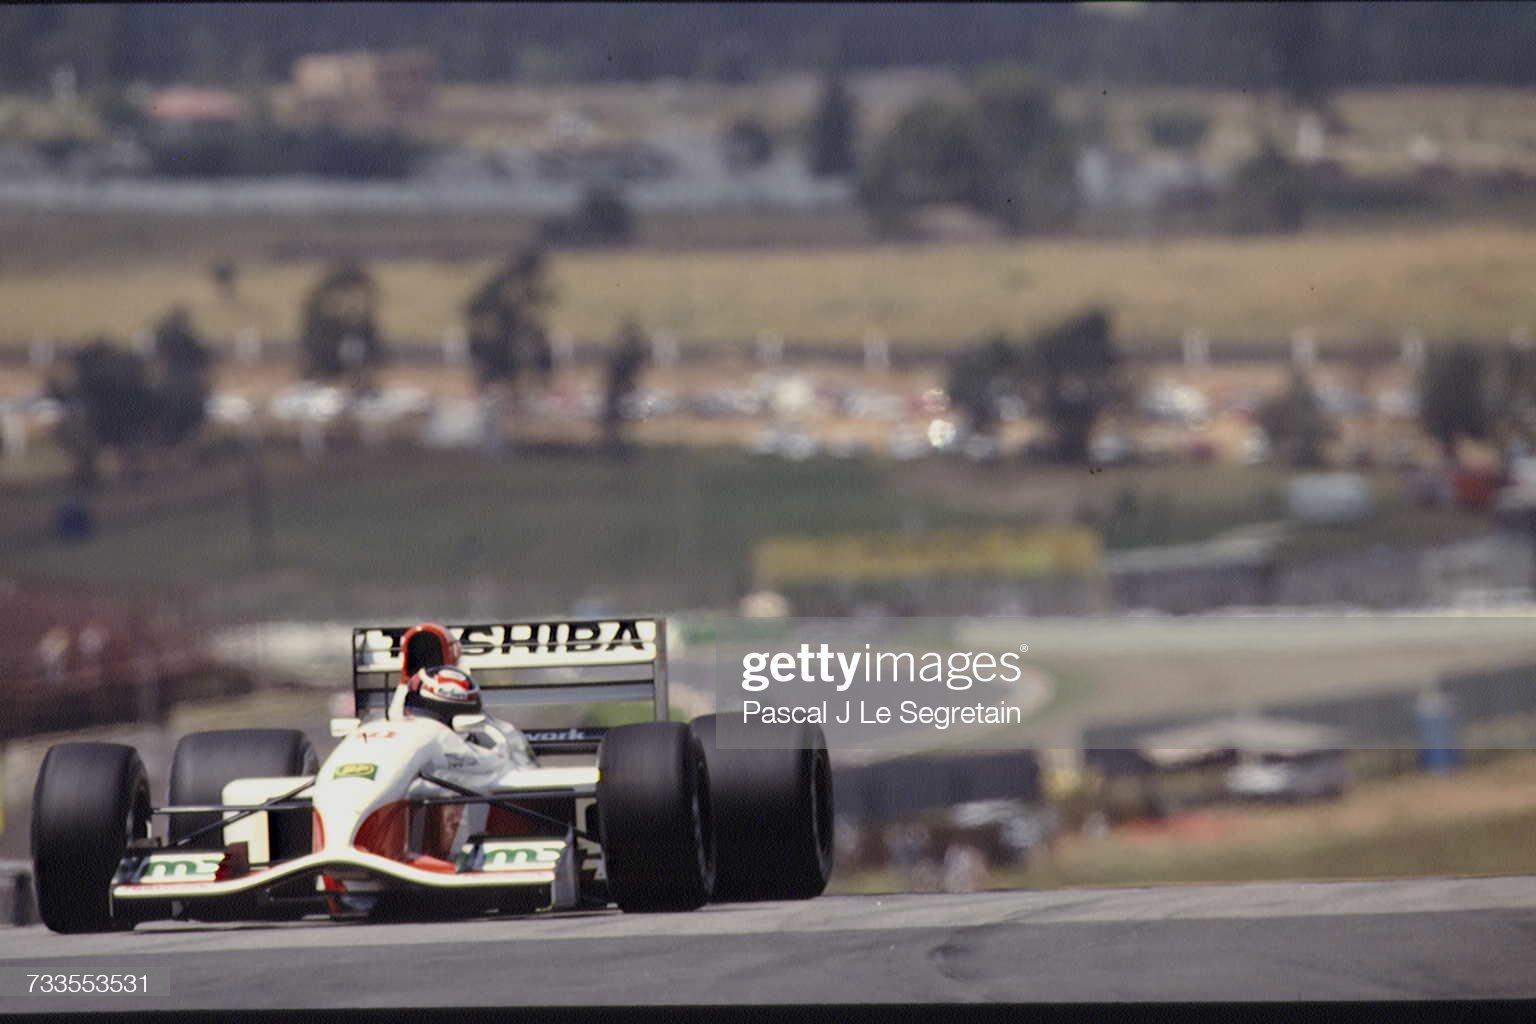 Kyalami, South African Grand Prix, on 28 February, 1992. 